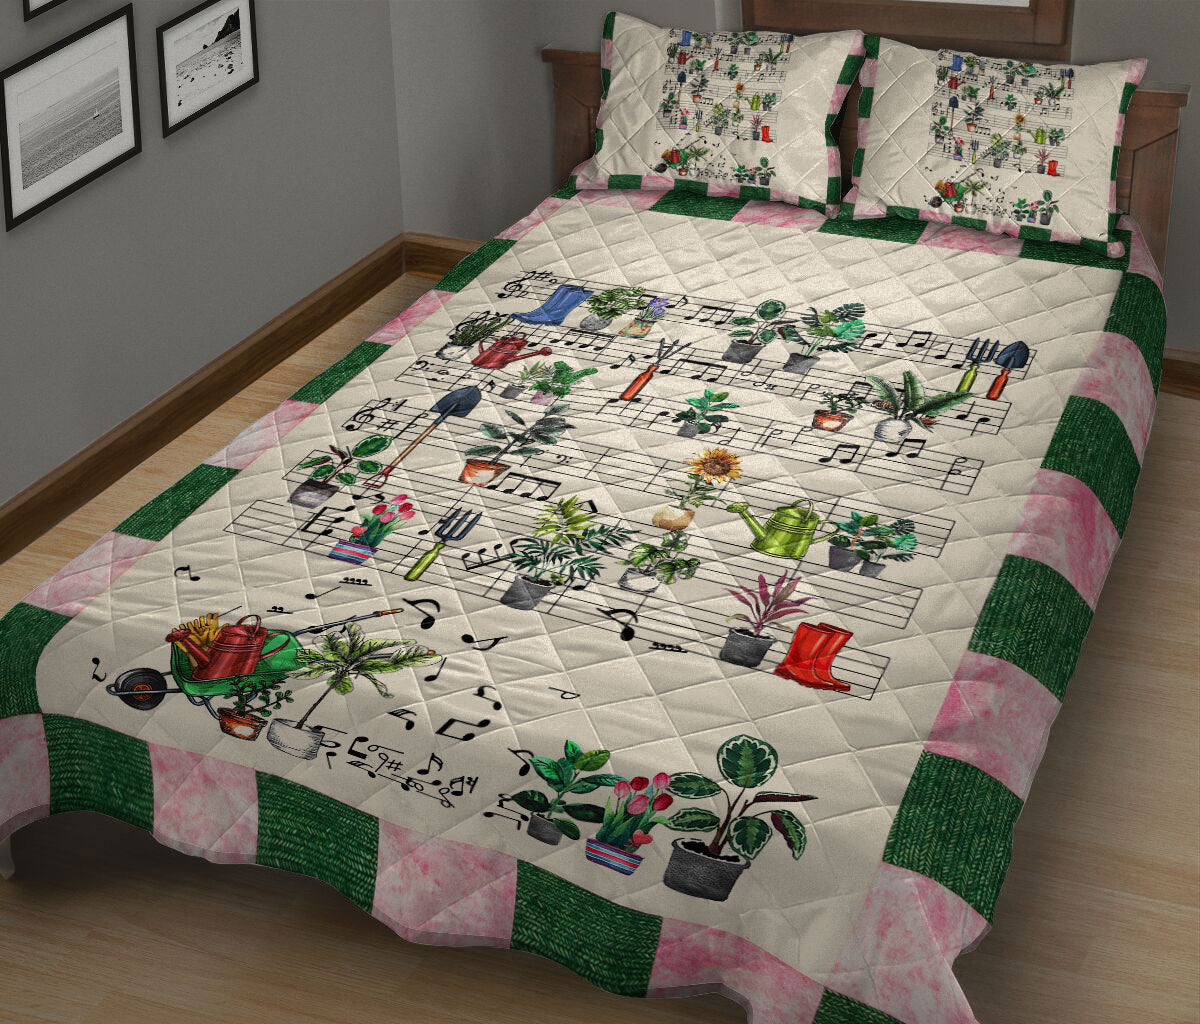 Ohaprints-Quilt-Bed-Set-Pillowcase-Garden-Flower-Tree-Music-Note-Unique-Gift-For-Gardening-Lovers-Green-Beige-Blanket-Bedspread-Bedding-2642-King (90'' x 100'')